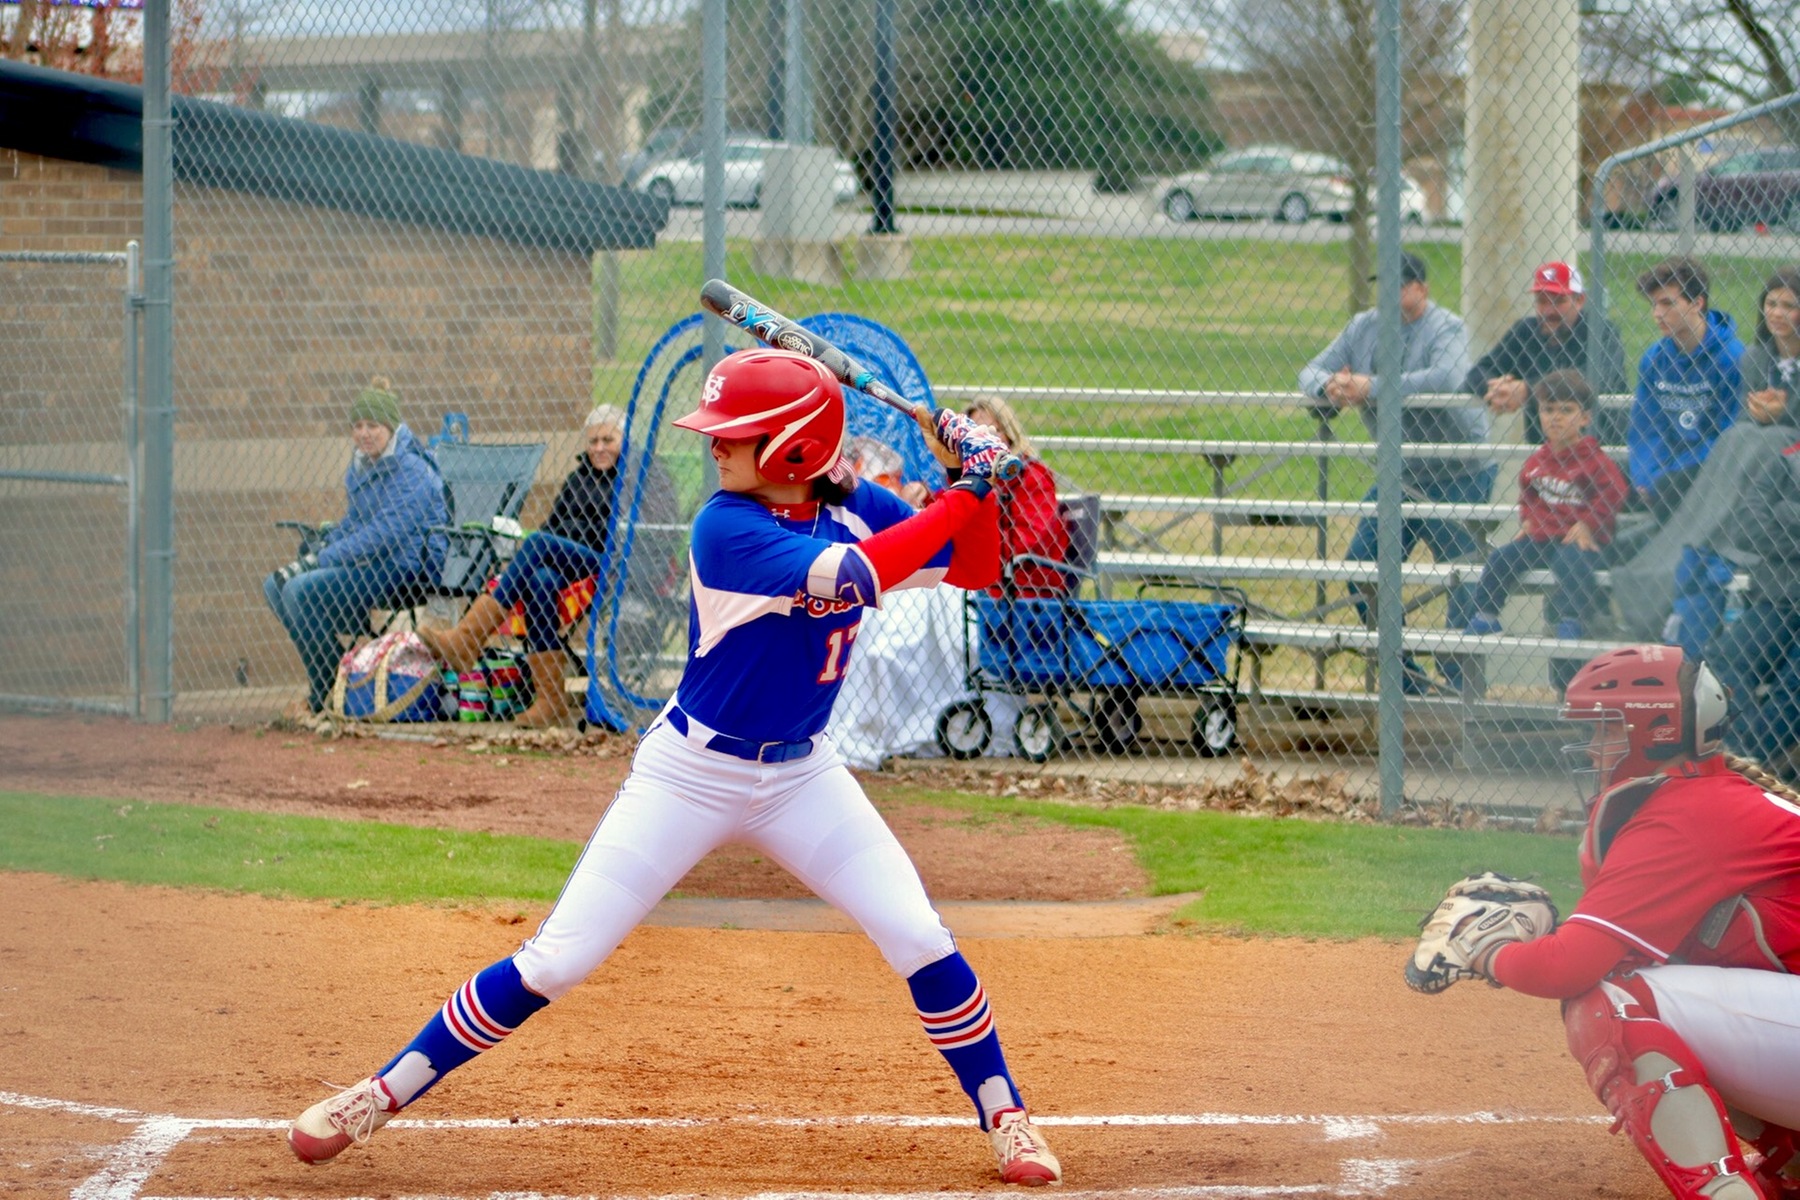 Outfielder Hannah Marlar at-bat against Dyersburg State Community College on March 15, 2019